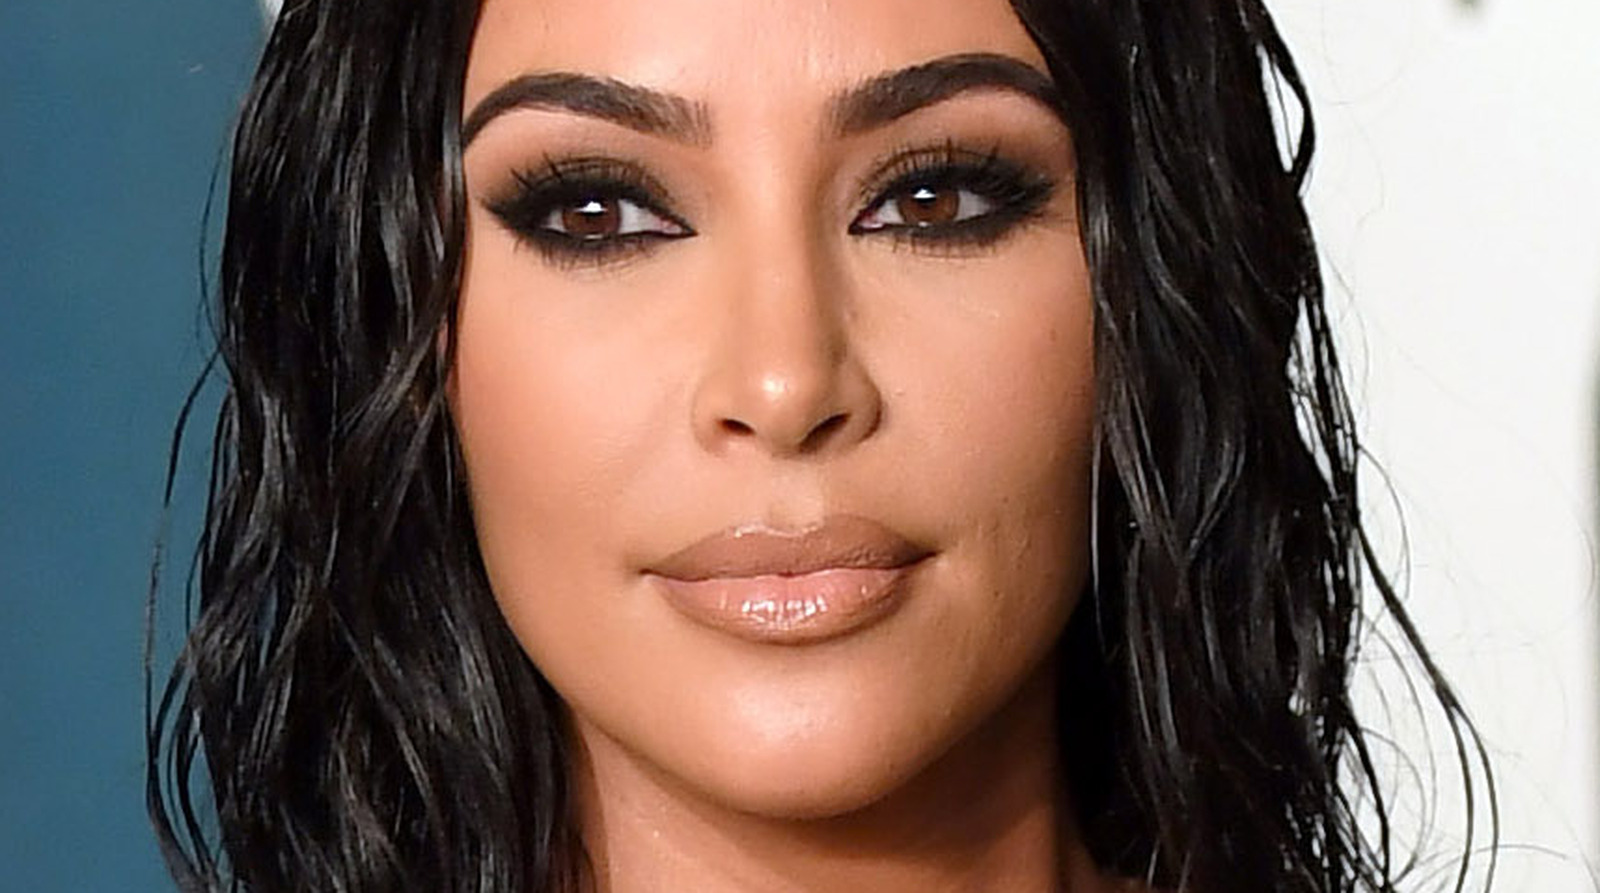 Kim Kardashians Alleged Treatment Of Former Employees Has Come Back To Haunt Her 0144